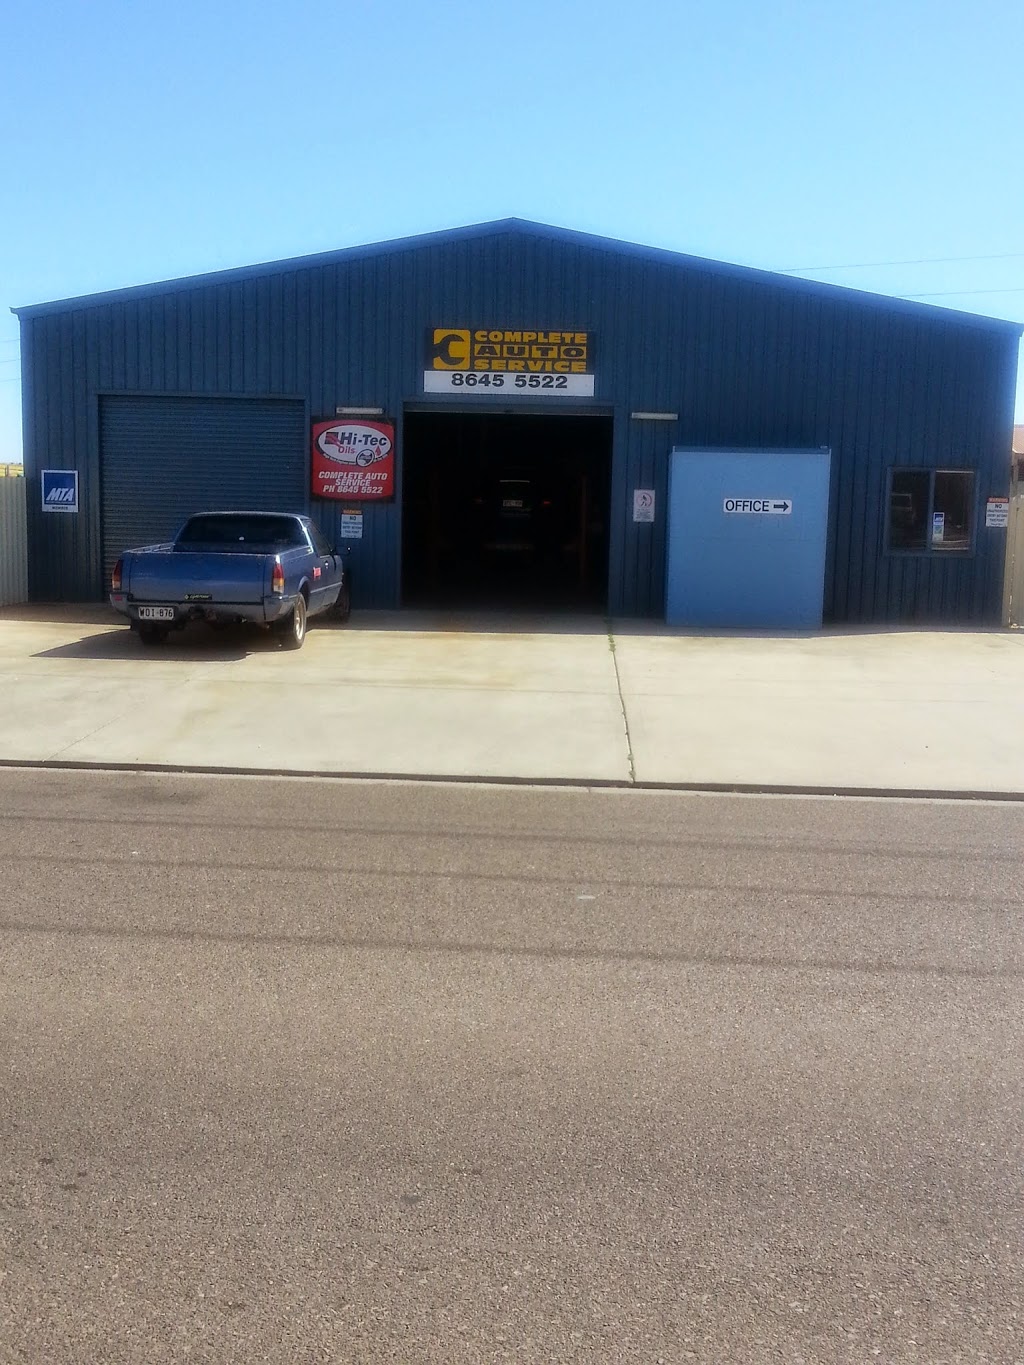 Complete Auto Service | 142A Lacey St, Whyalla Playford SA 5600, Australia | Phone: (08) 8645 5522